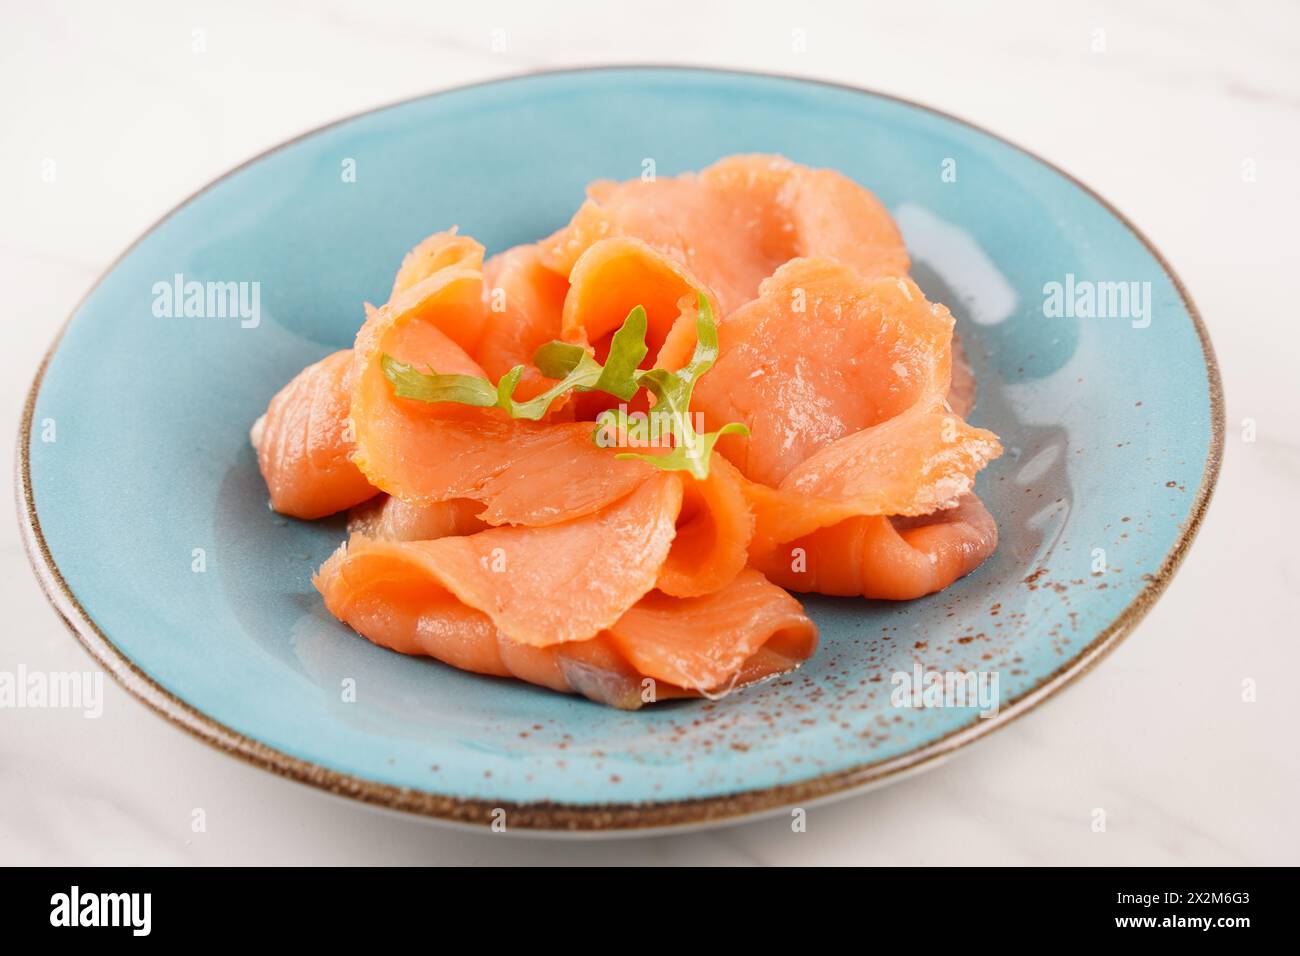 Smoked salmon on a blue plate on the white background Stock Photo